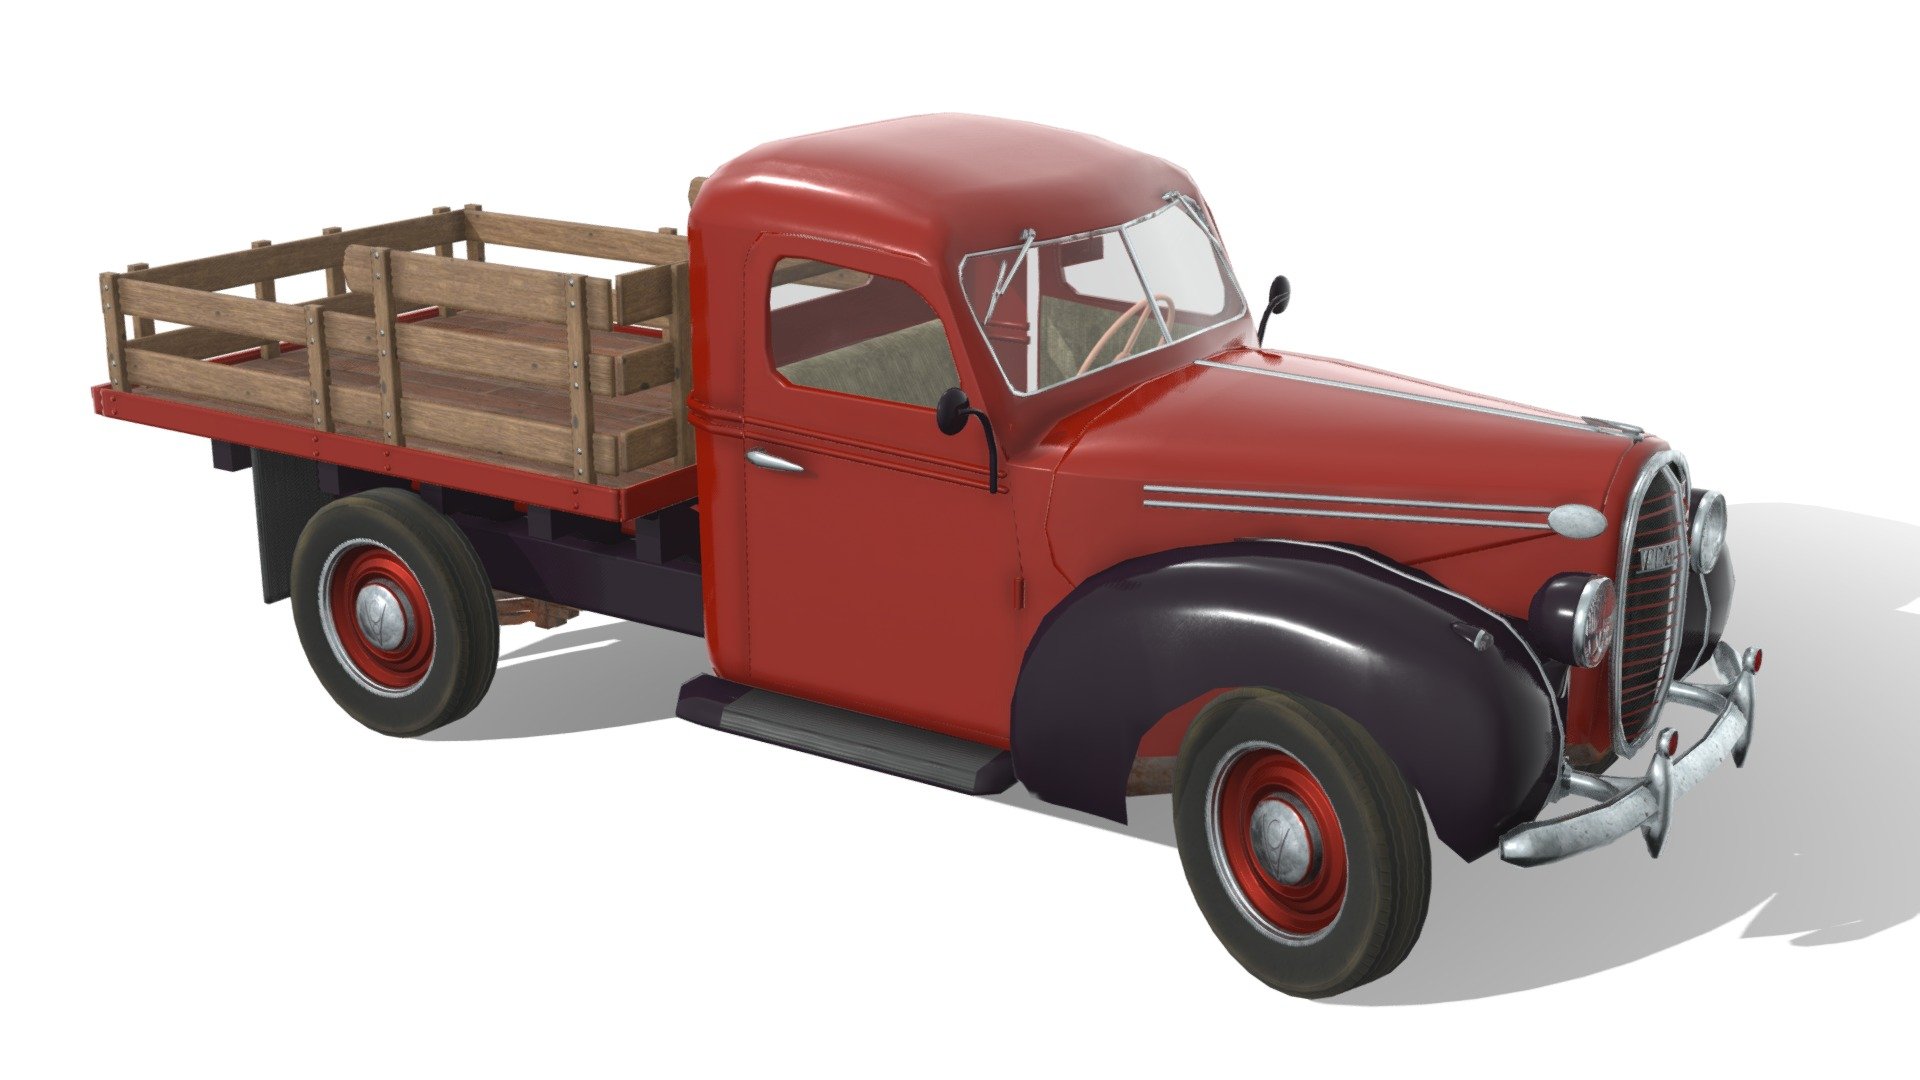 3D model of a 1938 ford variant I made, based on the Latvian made Vairogs line of vehicles. 
Originally made for my game project, but feel free to use it in your own! - 1938 Vairogs V8 flatbed truck (Ford based) - Download Free 3D model by Libau Media (@robinmikart) 3d model